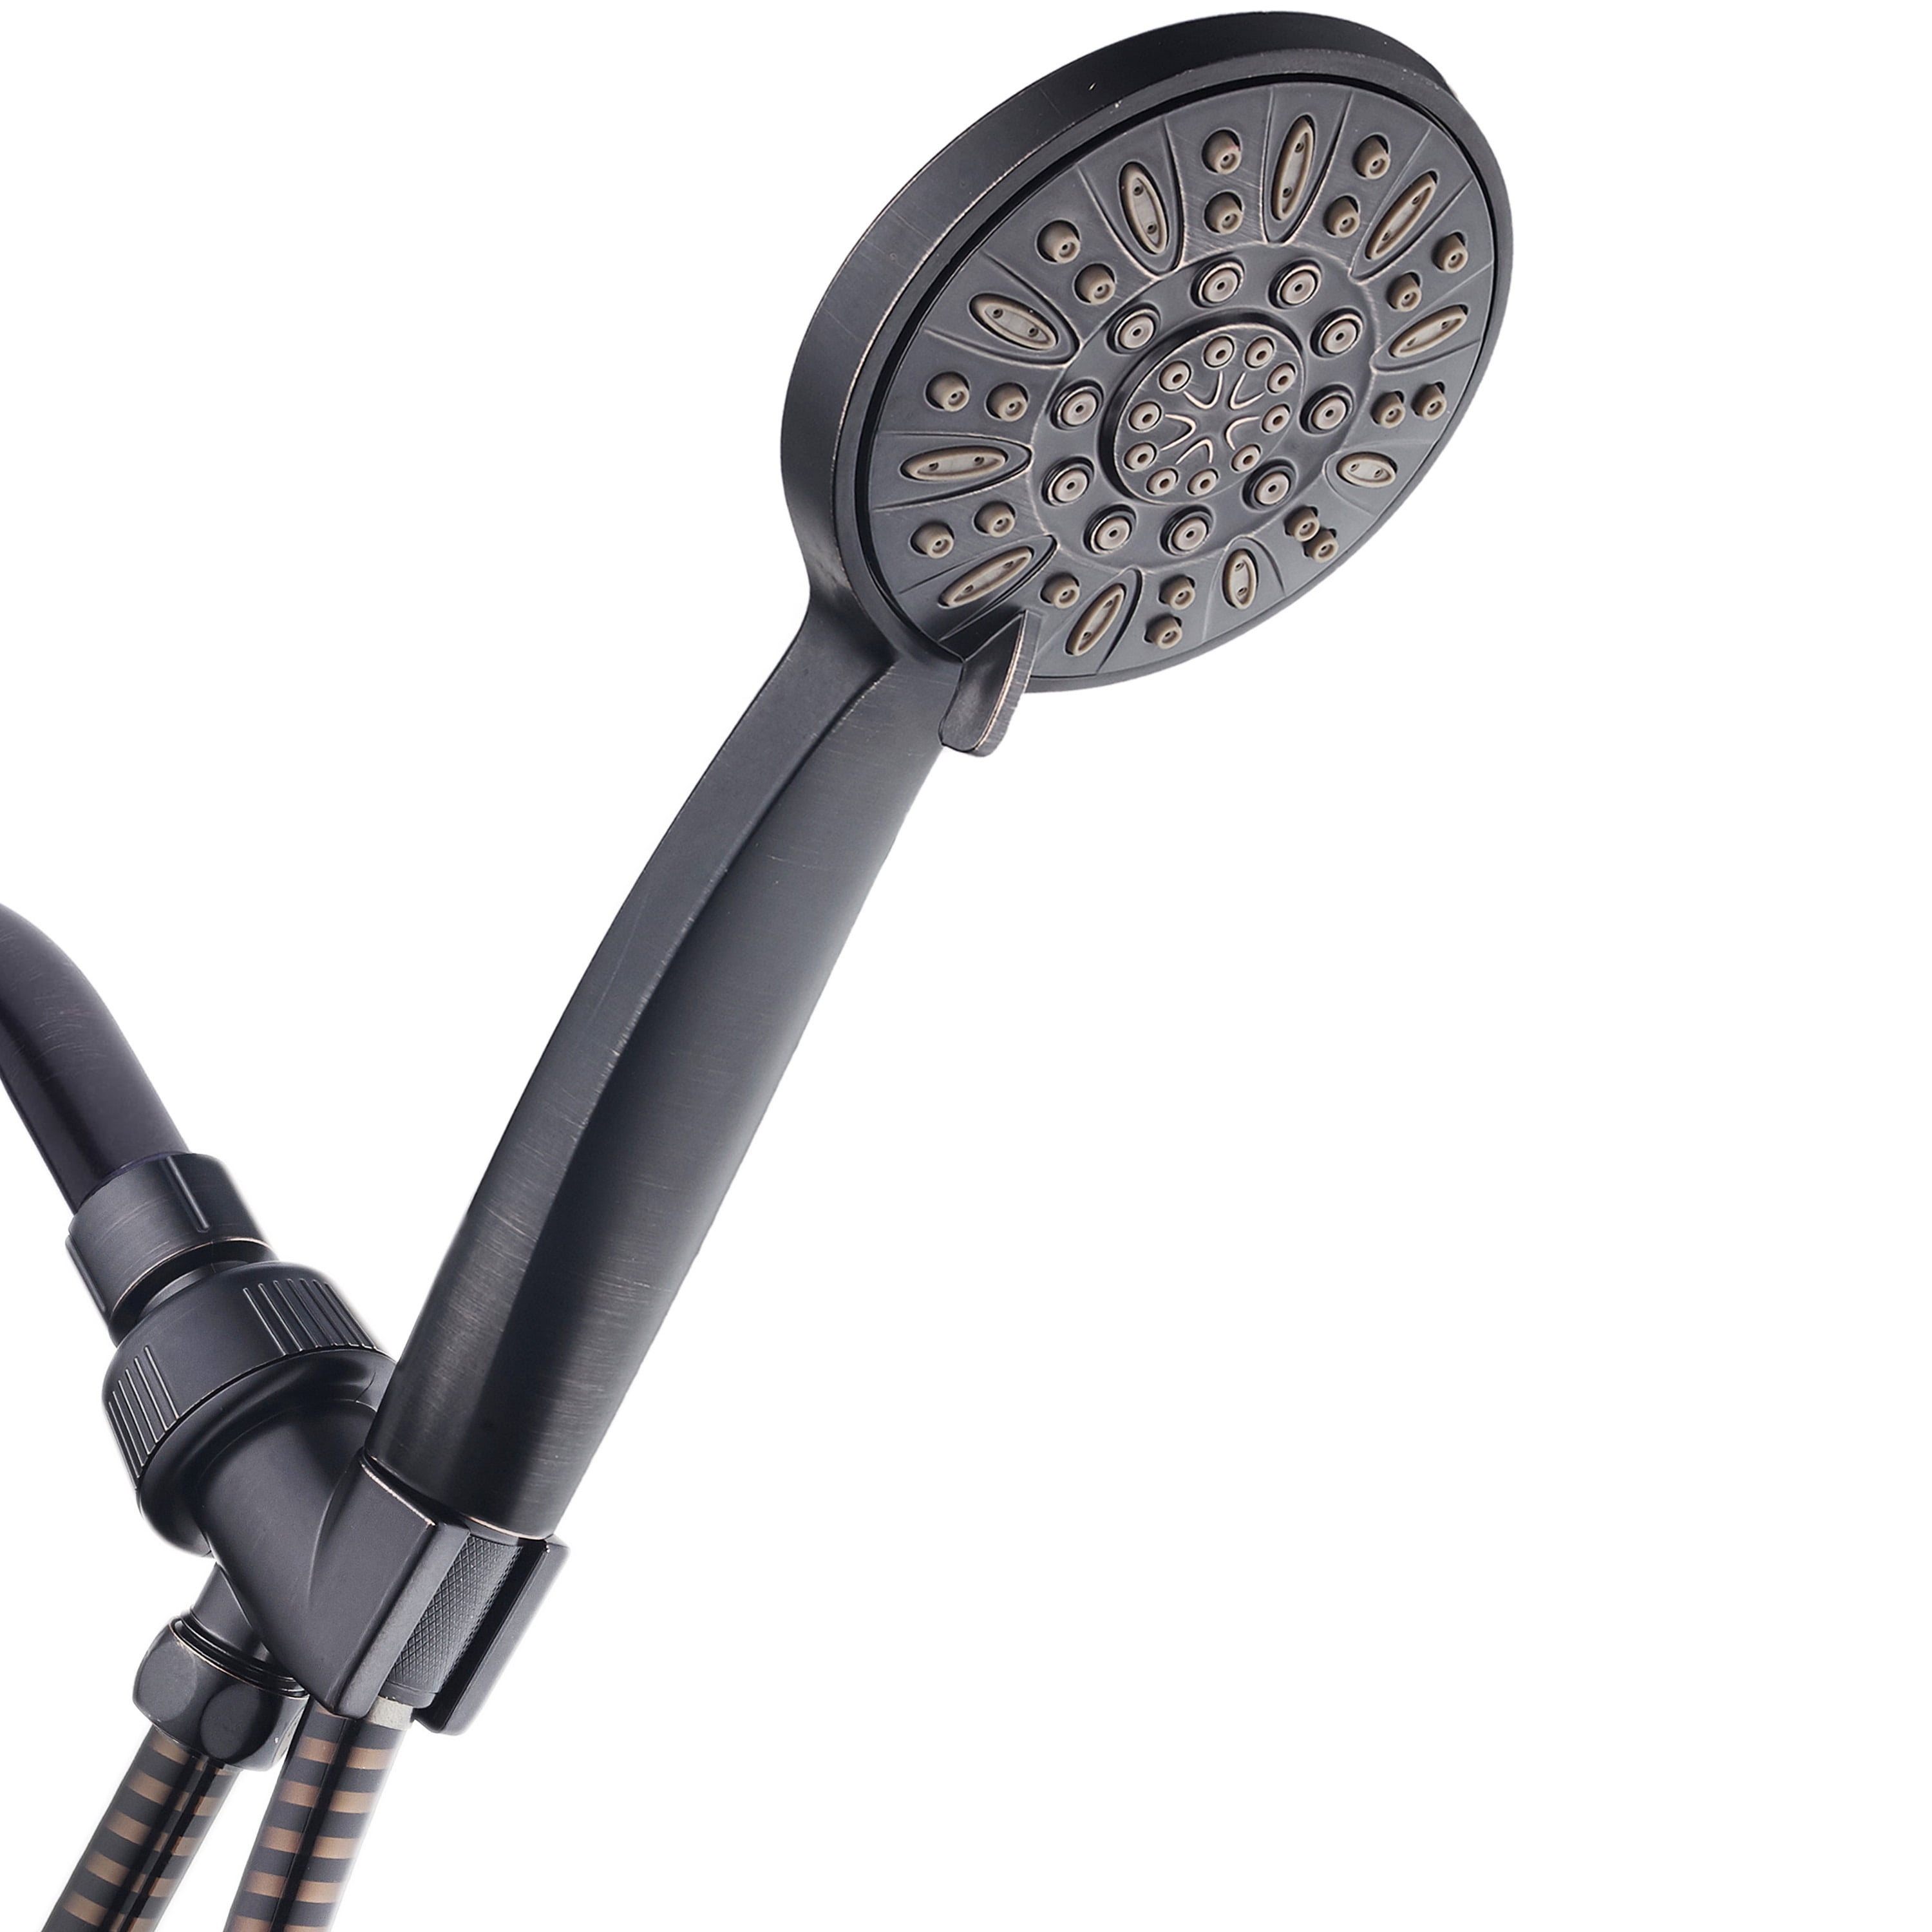 Handhled Shower Head High Pressure Water Saving Pause Function 3-Speed Setting 